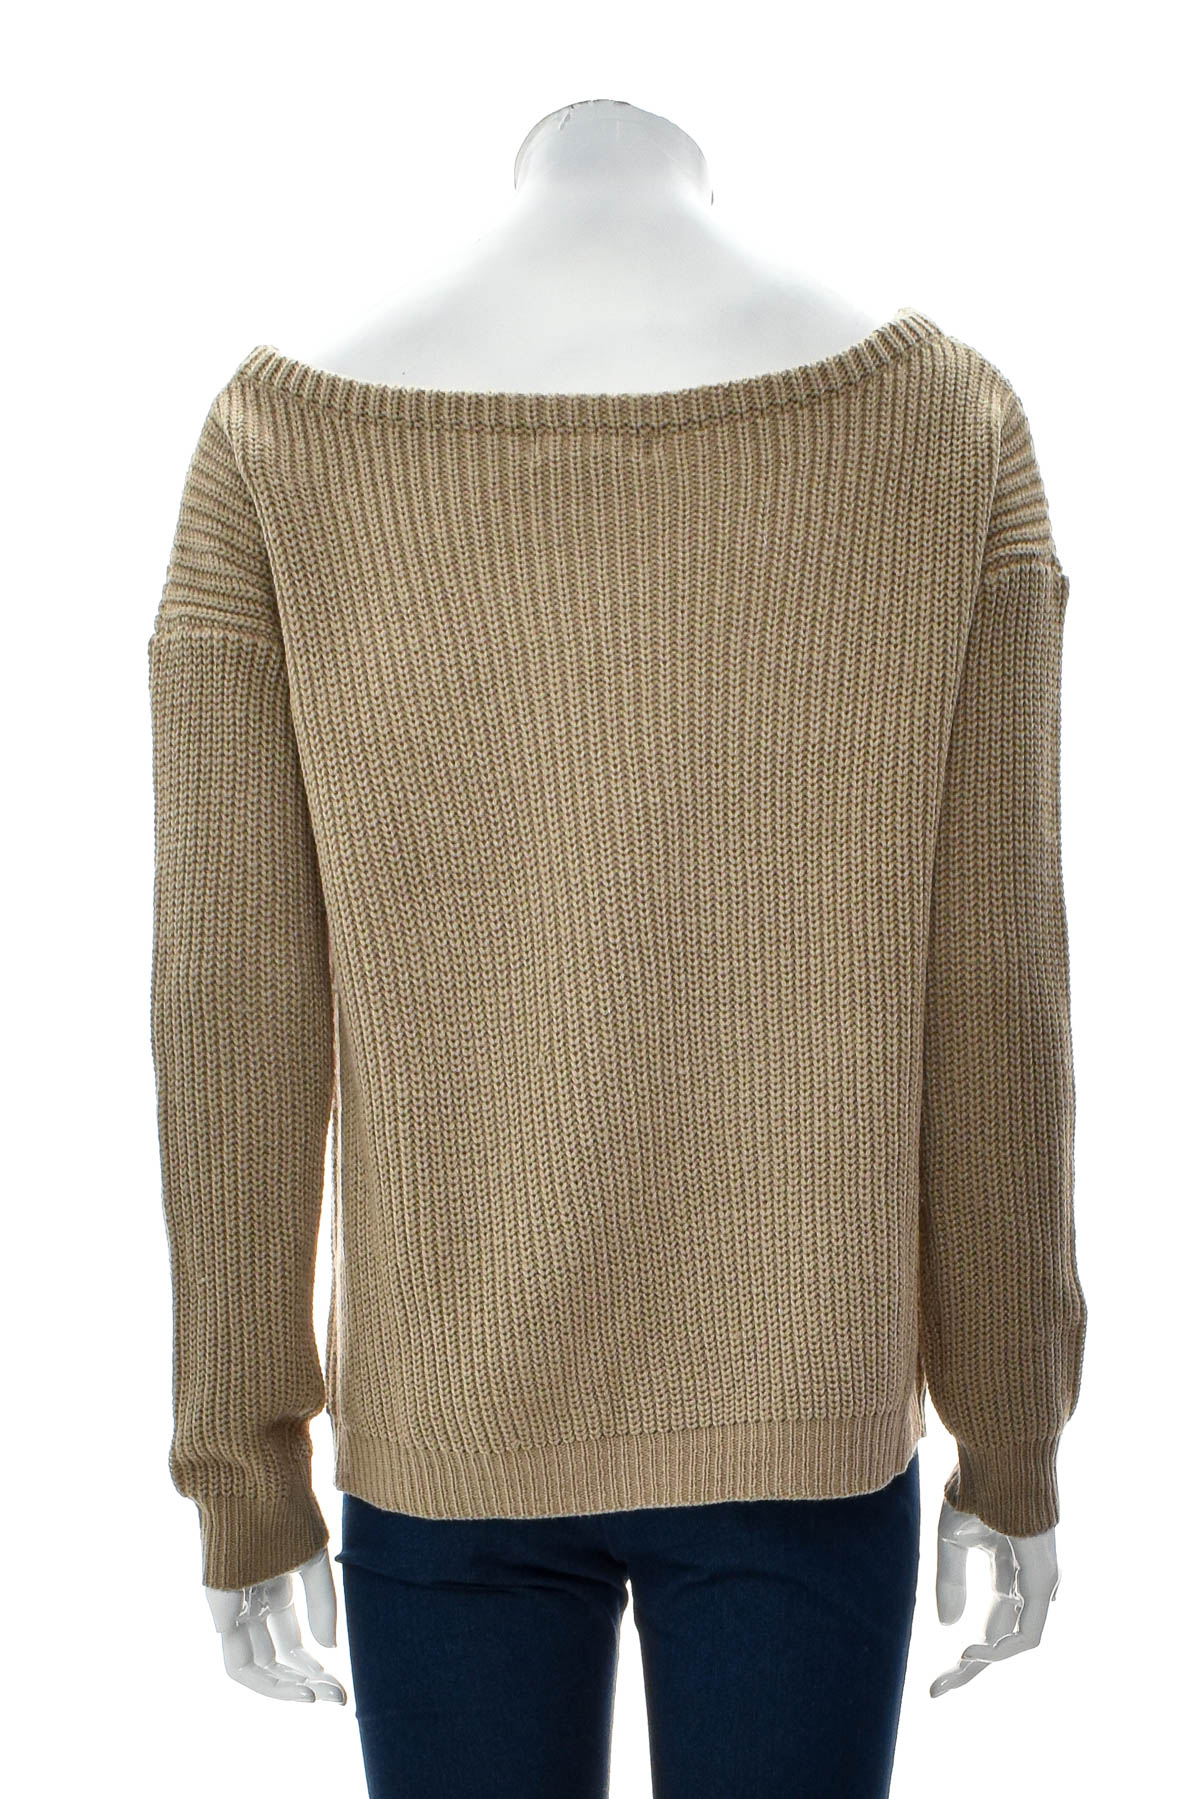 Women's sweater - MISSGUIDED - 1